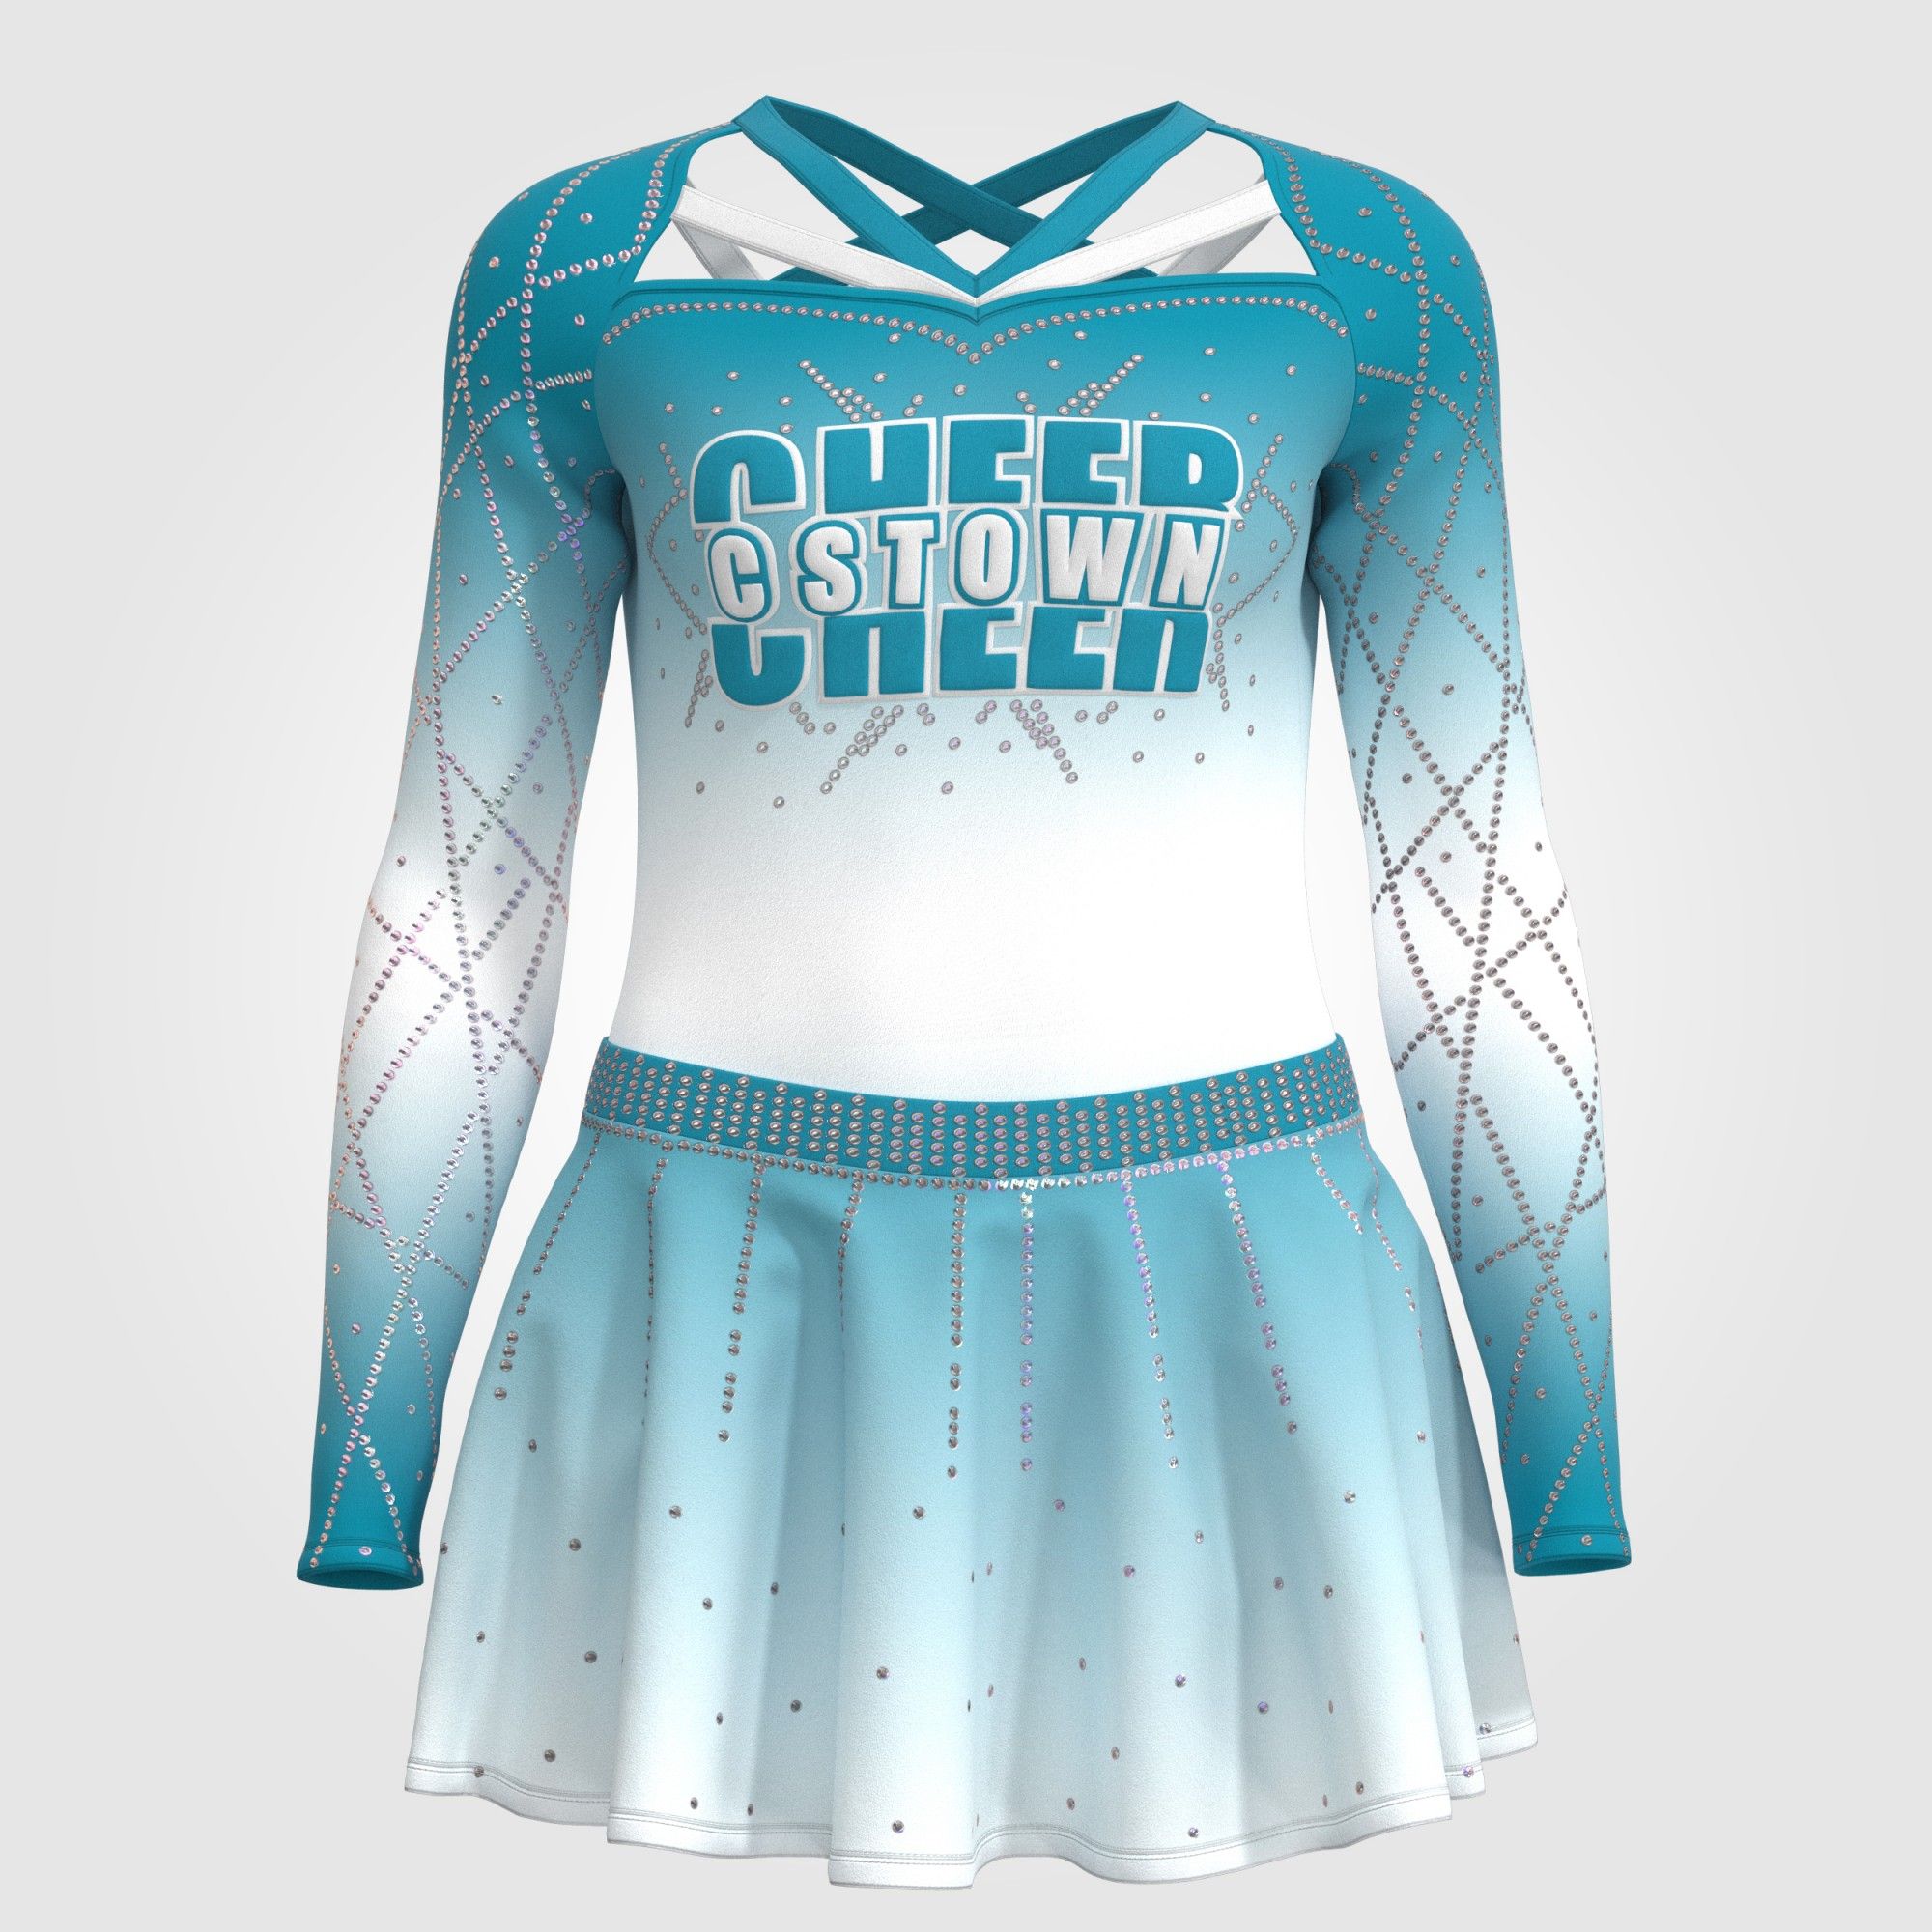  female halter top blue and white cheerleading outfit